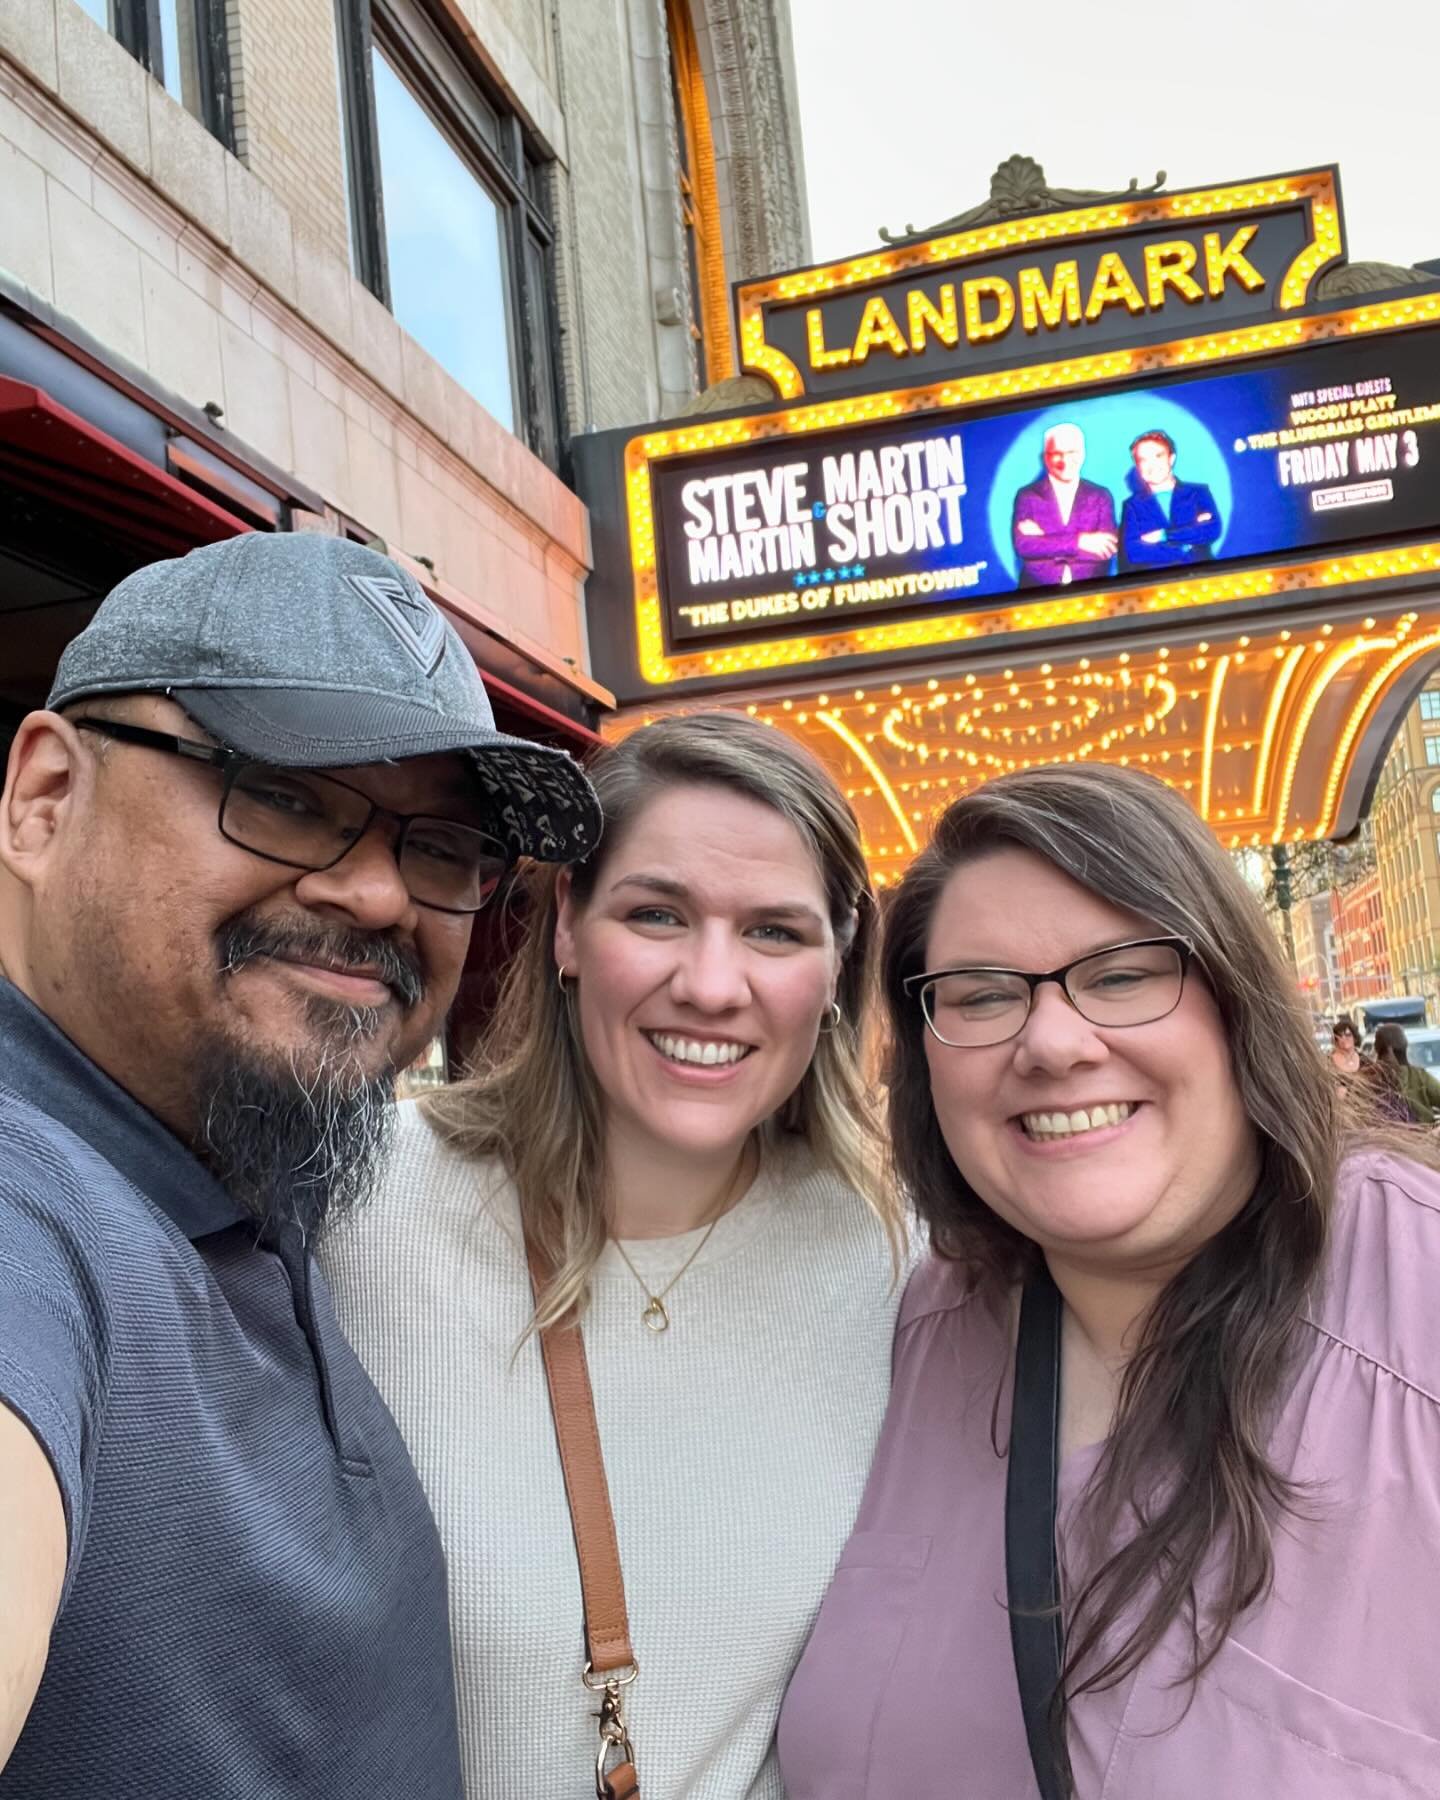 What a beautiful theatre! And to top it off. We&rsquo;re get so see Steve Martin AND Martin Short LIVE!!! What a great family trip.
#stevemartin #martinshort